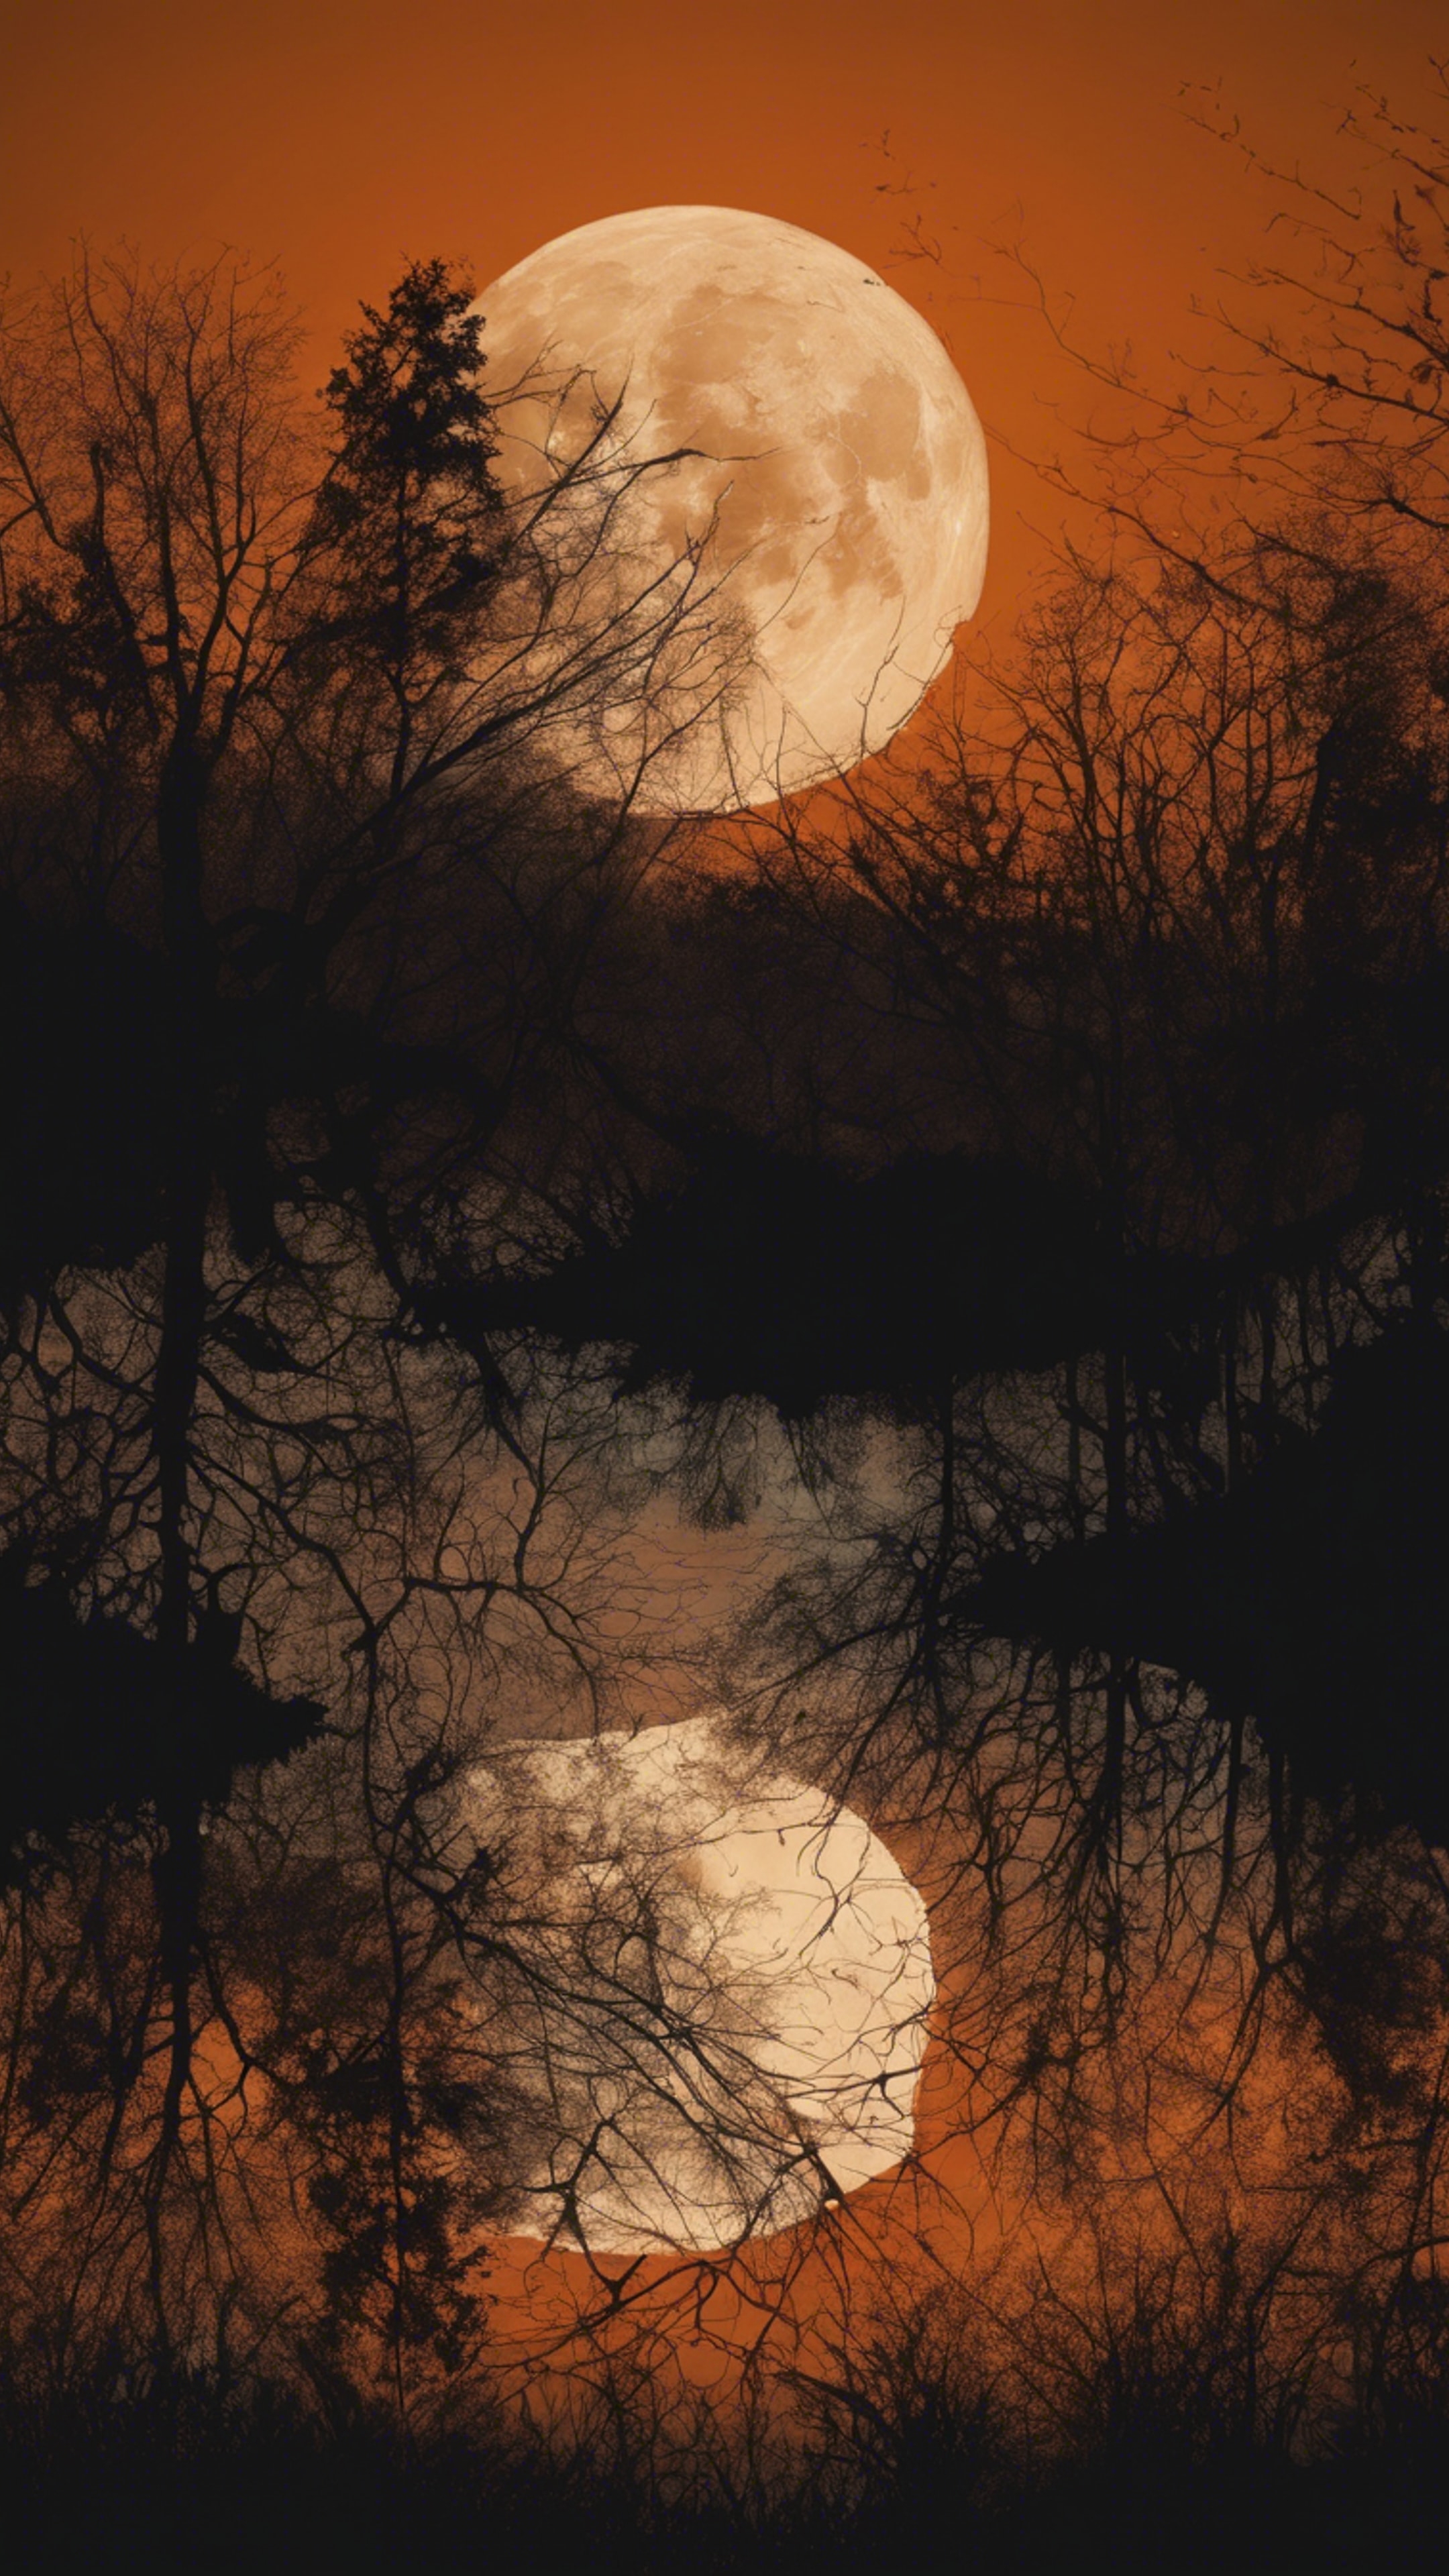 Gleaming full moon over black silhouetted forest contrasted by a deep orange sky. วอลล์เปเปอร์[d3ef8041818348d2b22b]